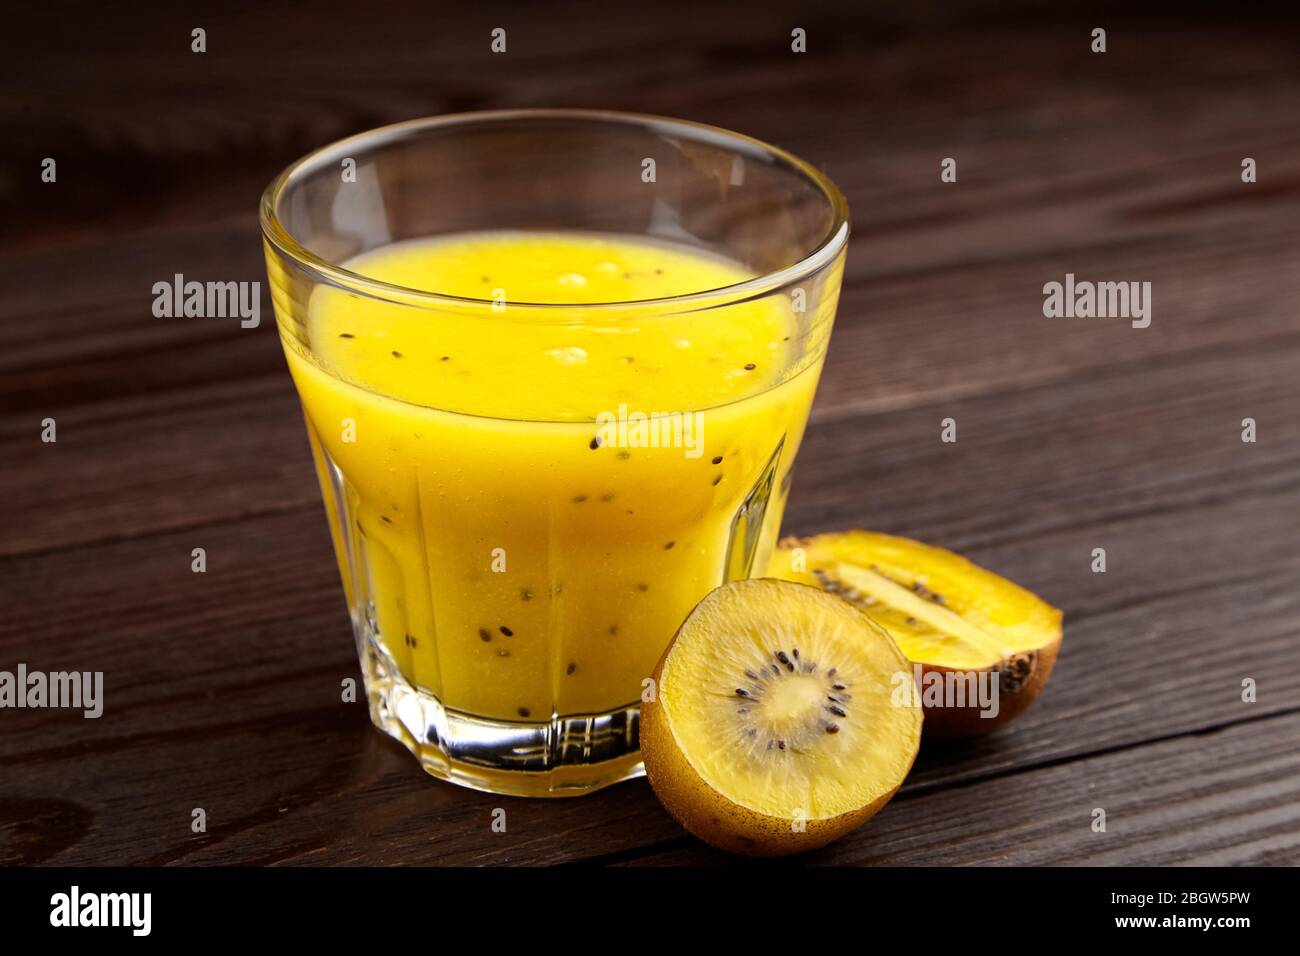 Kiwi gold fruit juice in transparent glass on wooden table. Half of yellow kiwi. Fresh kiwi smoothie. Healthy food and drink Stock Photo